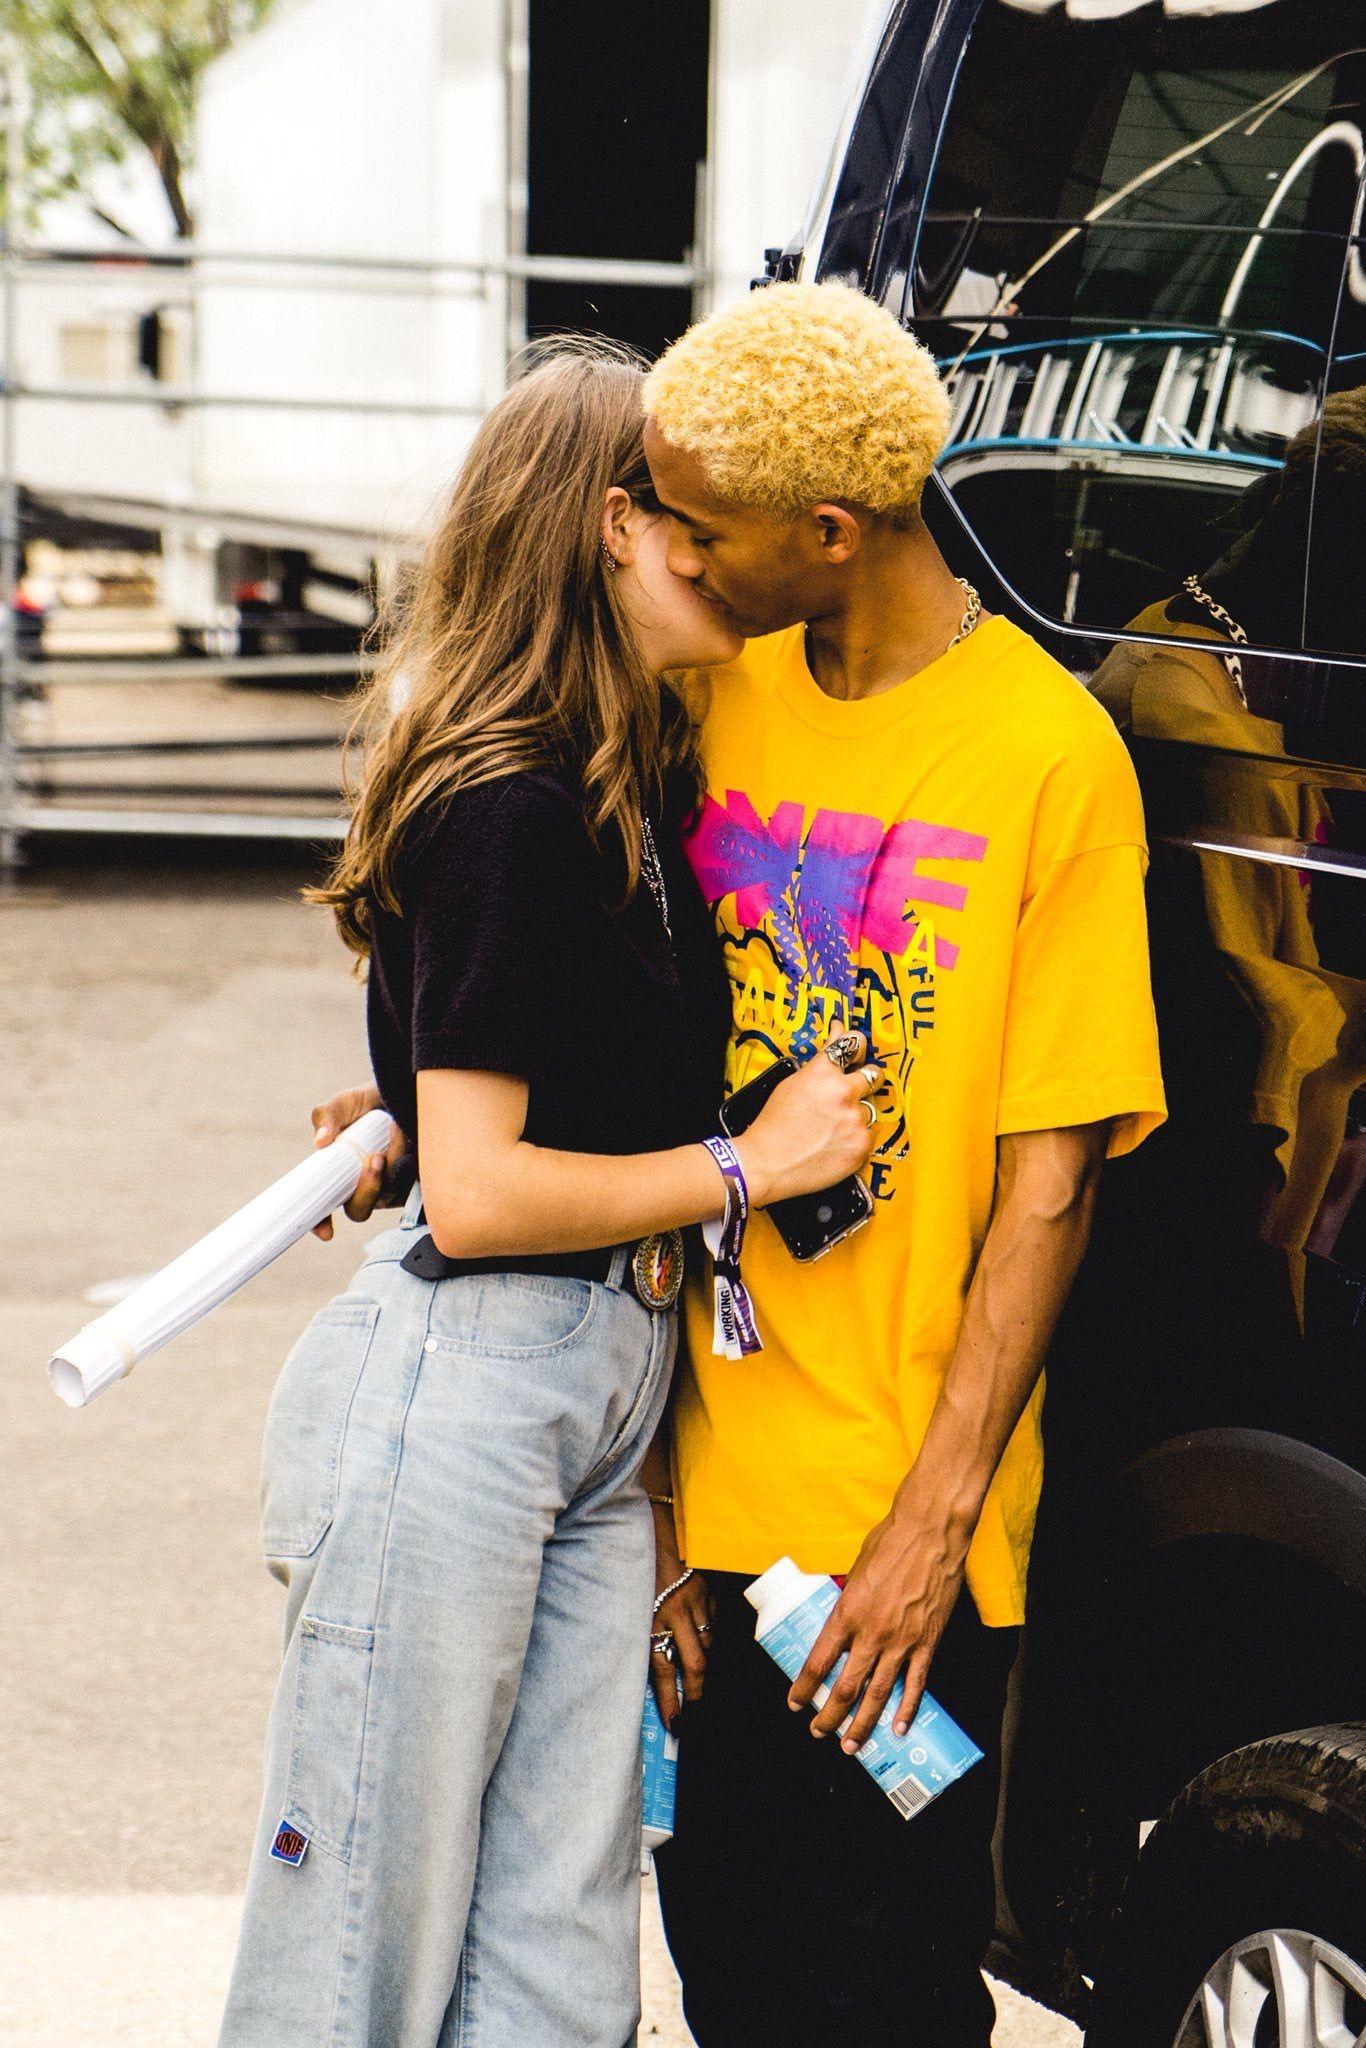 Pin By Wigglesworth On Syre Erys In 2019. Jaden Smith Fashion